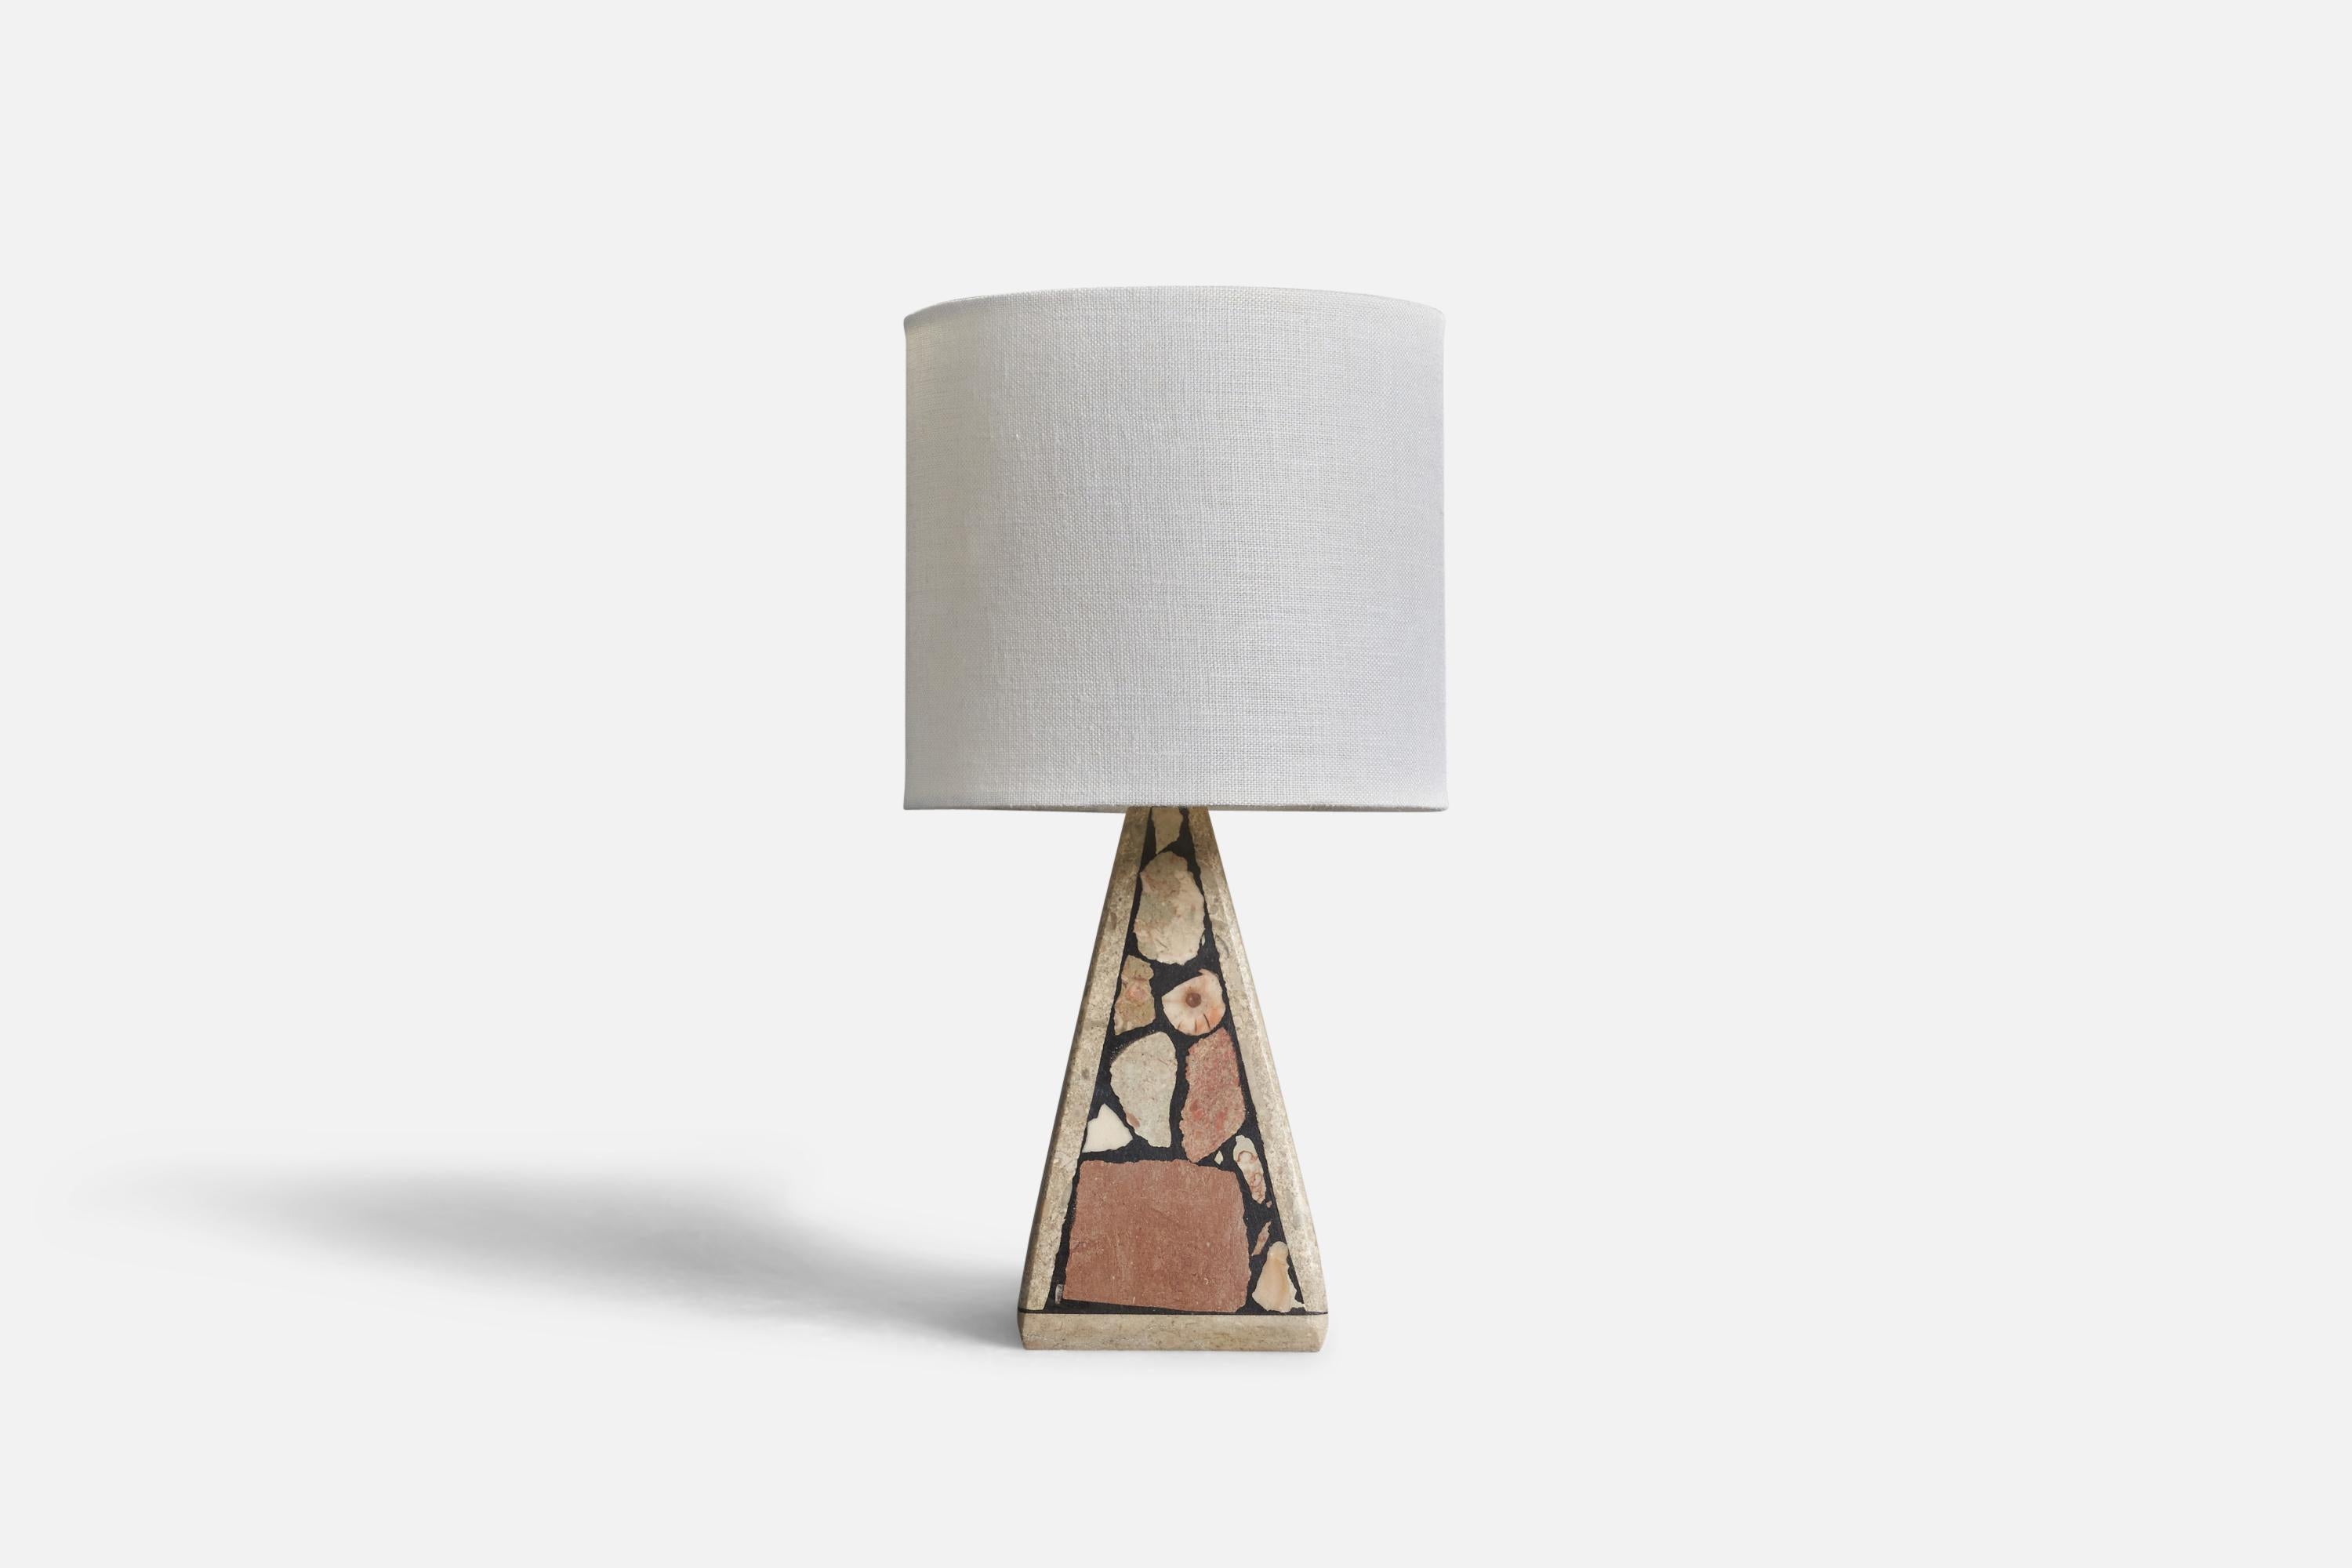 A fossil stone table lamp designed and produced by a Swedish Designer, Sweden, 1970s.

Dimensions of lamp (inches) : 8.2 x 3.4 x 3.4 (Height x Width x Depth)
Dimensions of lampshade (inches) : 6 x 6 x 5.5 (Top Diameter x Bottom Diameter x